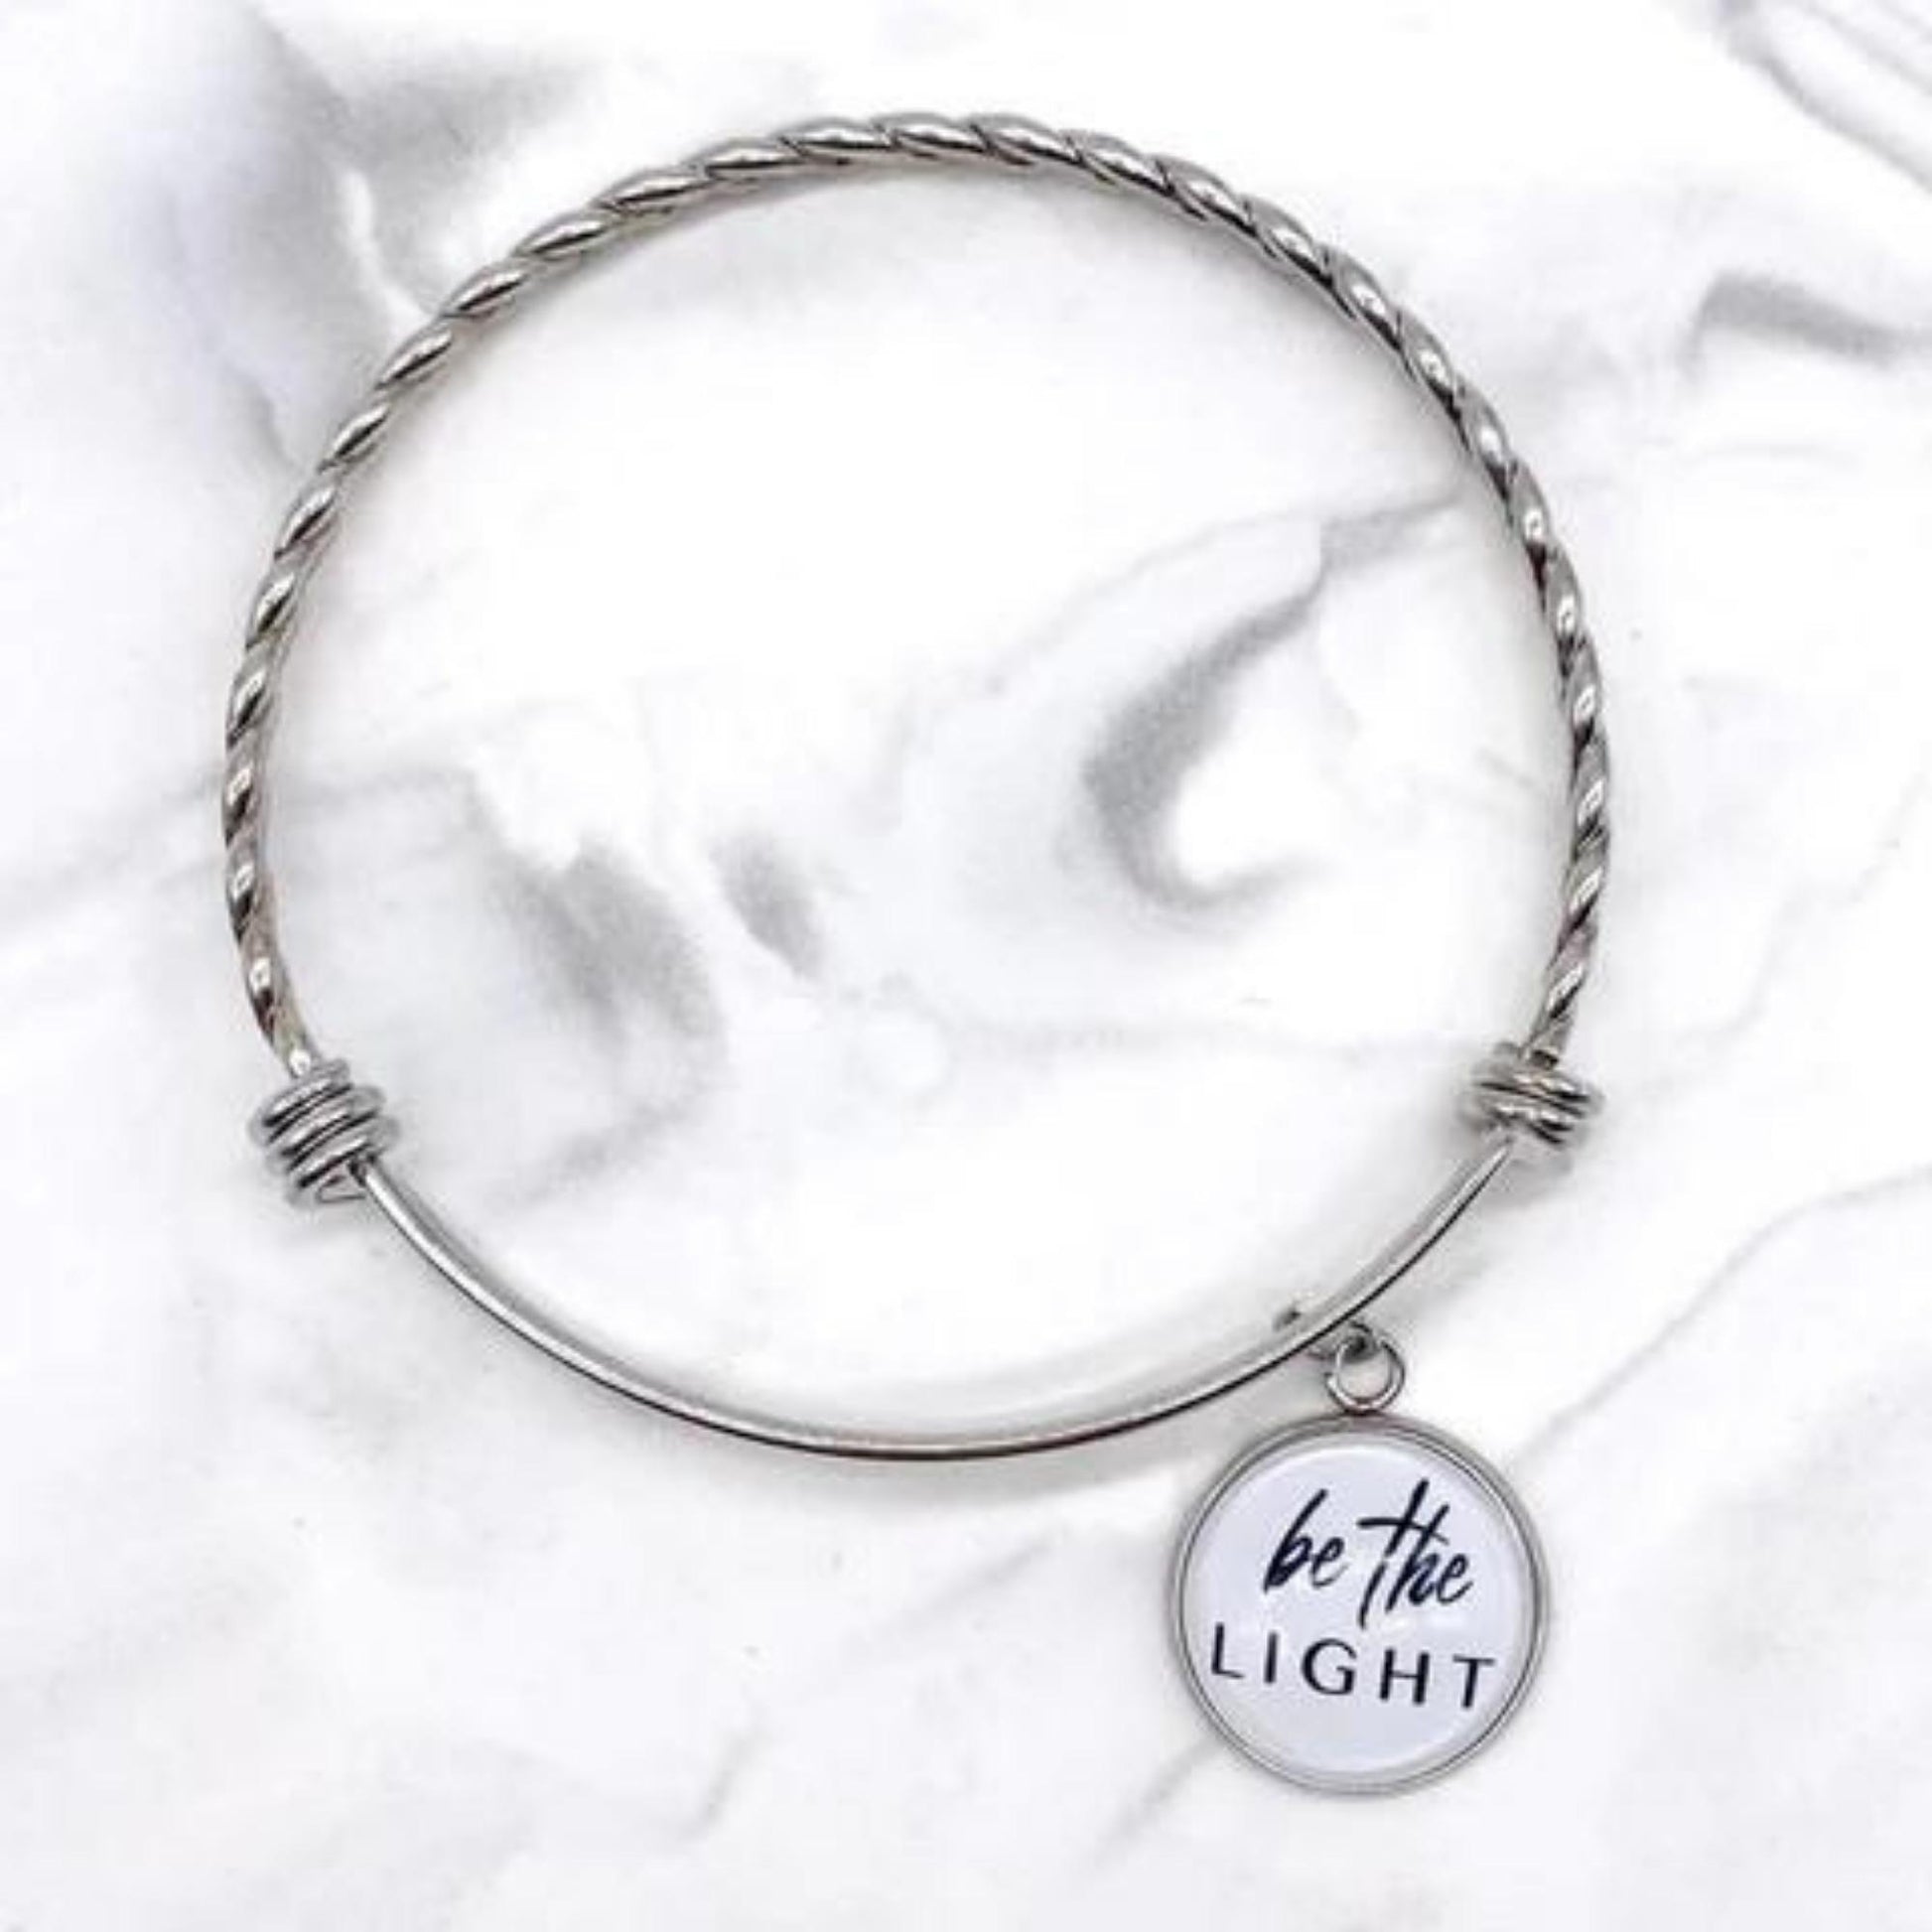 Inspirational Stainless Steel Bracelet Collection - Choose from Worthy or Be the Light | be the LIGHT stainless steel Christian bracelet shown | oak7west.com